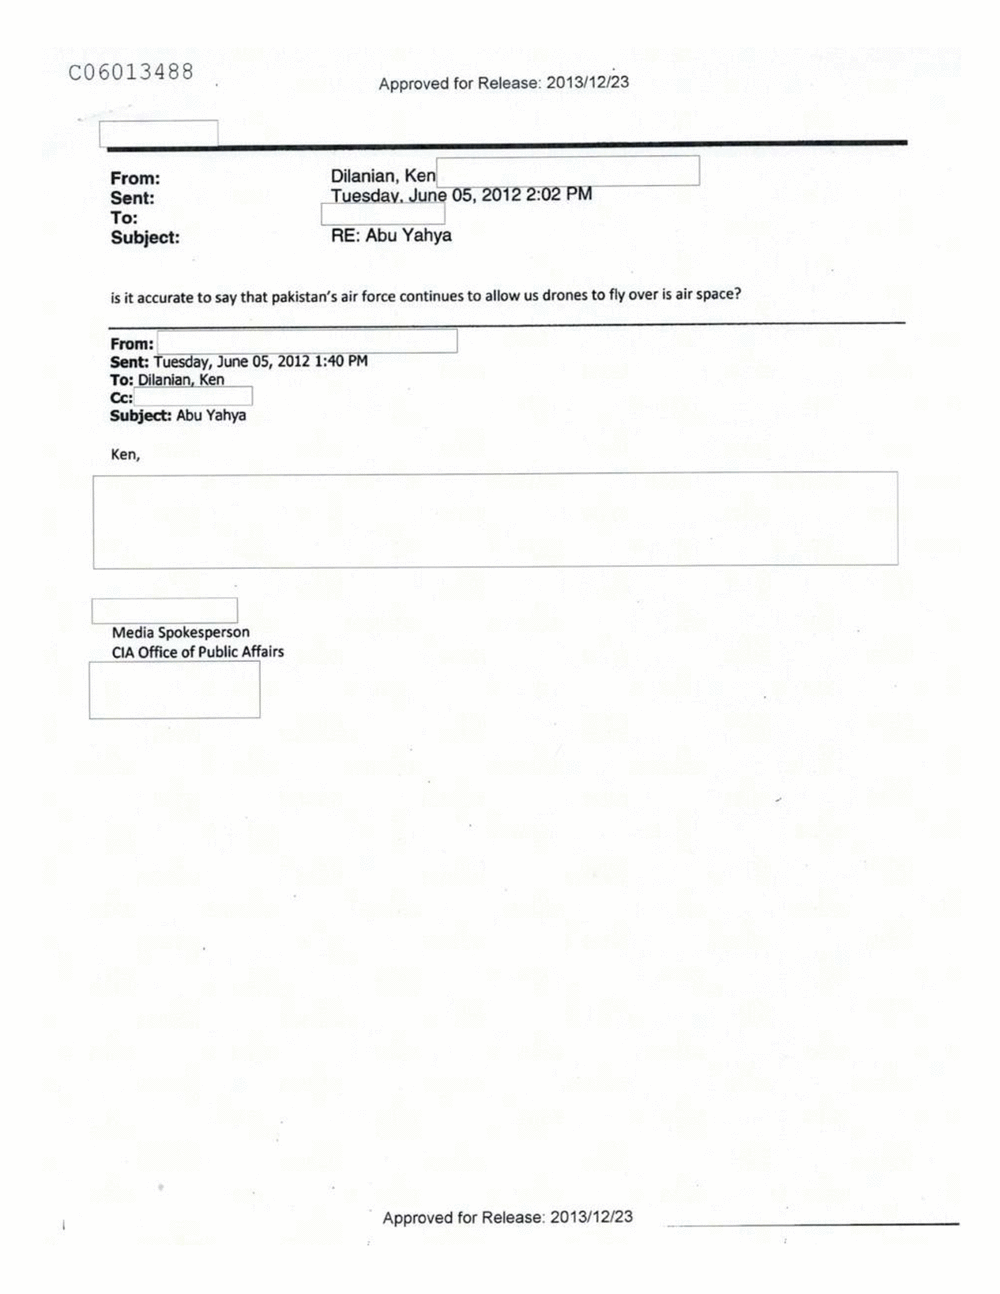 Page 339 from Email Correspondence Between Reporters and CIA Flacks